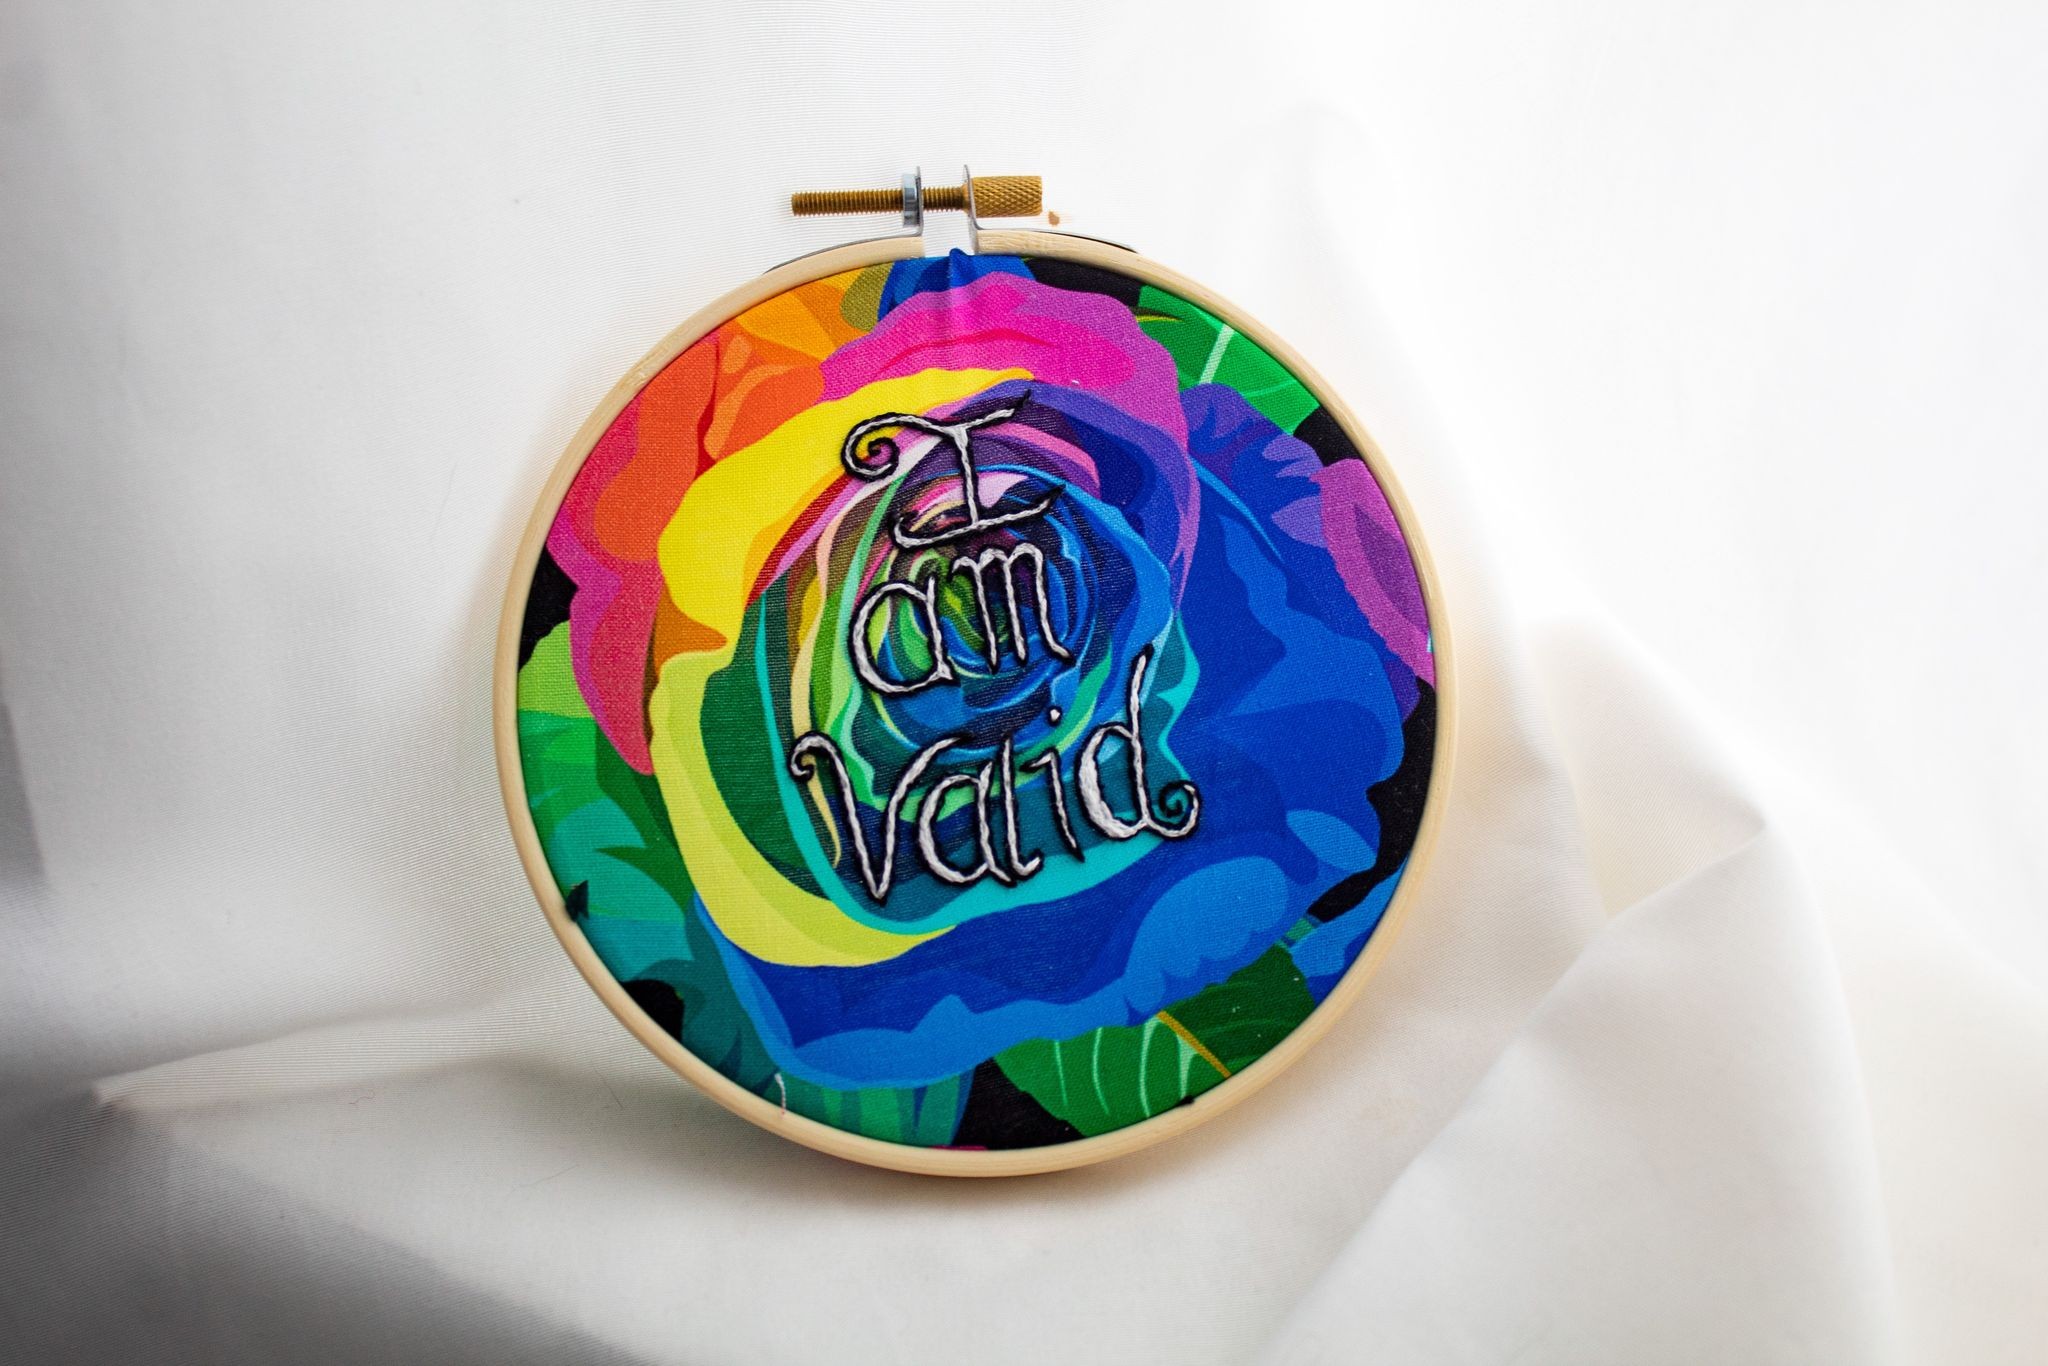 Product image of an embroidery featuring the words "I am valid"  in white thread with black outline embroidered over  rainbow-coloured rose-printed fabric, the whole in a wooden hoop and set against a white fabric backdrop